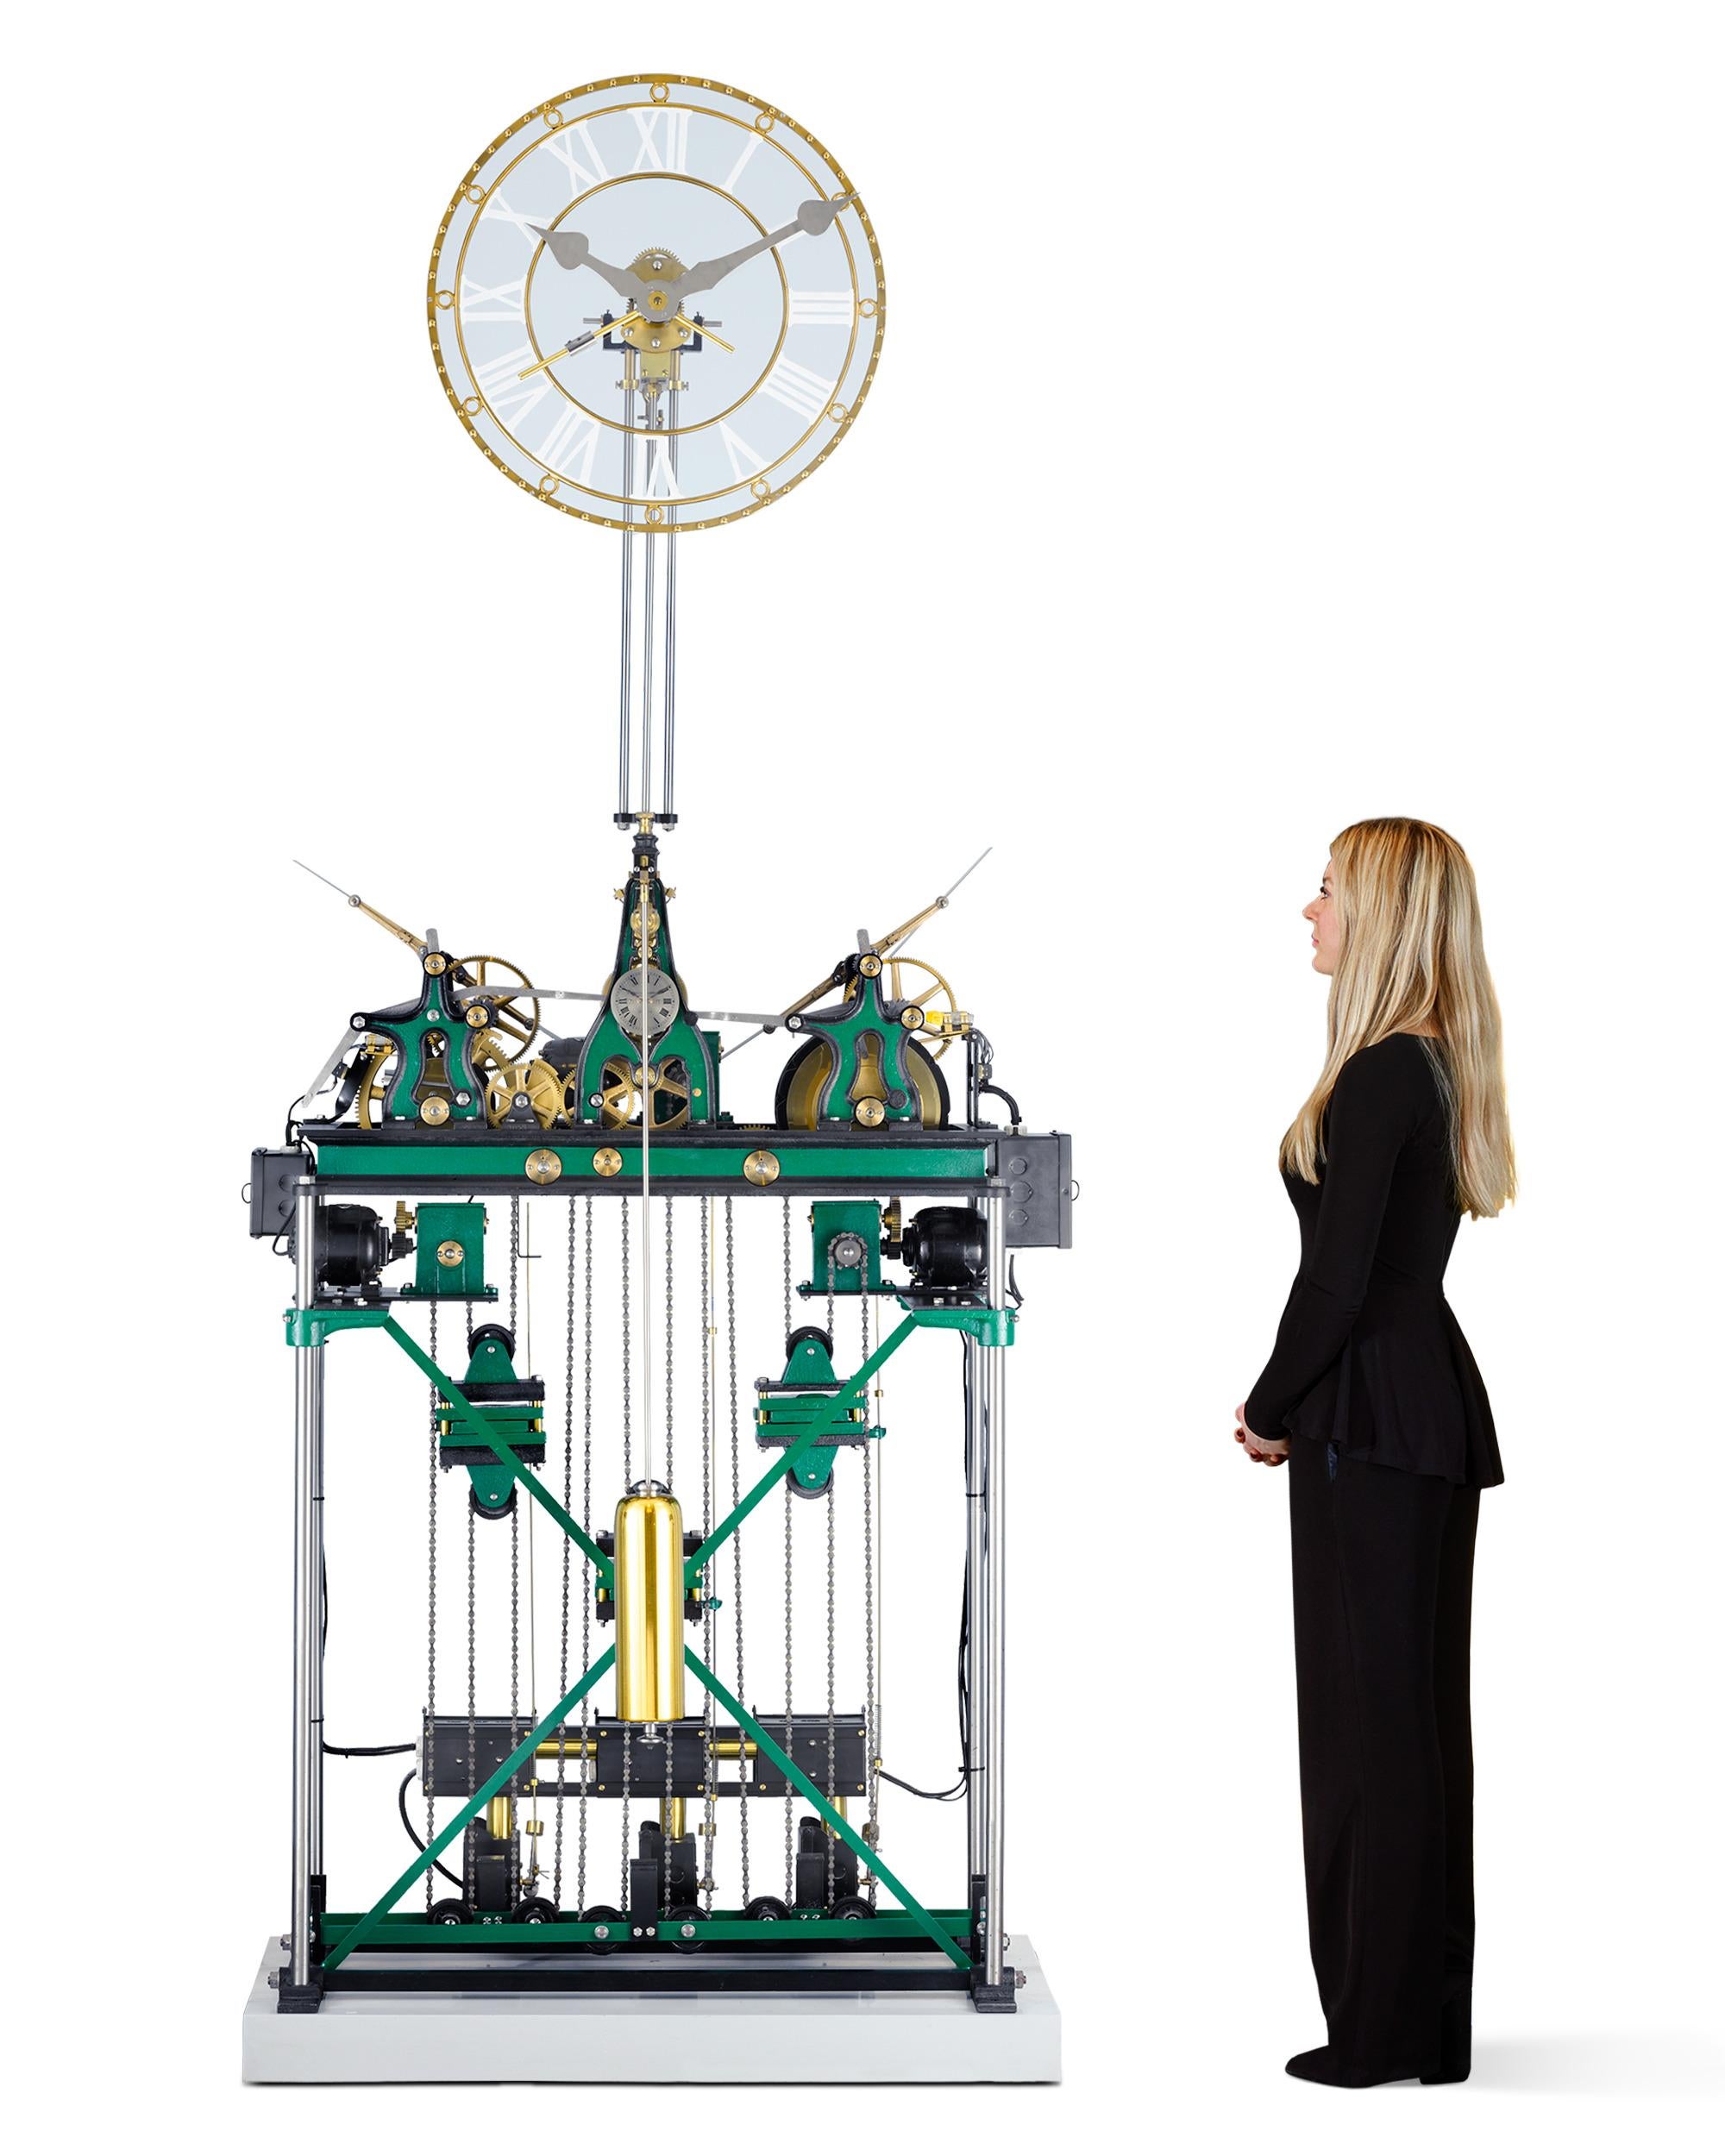 This remarkable tower clock with a three-train, automatically winding movement was created by the Seth Thomas Clock Company, one of the world's most revered clockmakers. The timepiece is grand in both size and beauty. Featuring a combination of